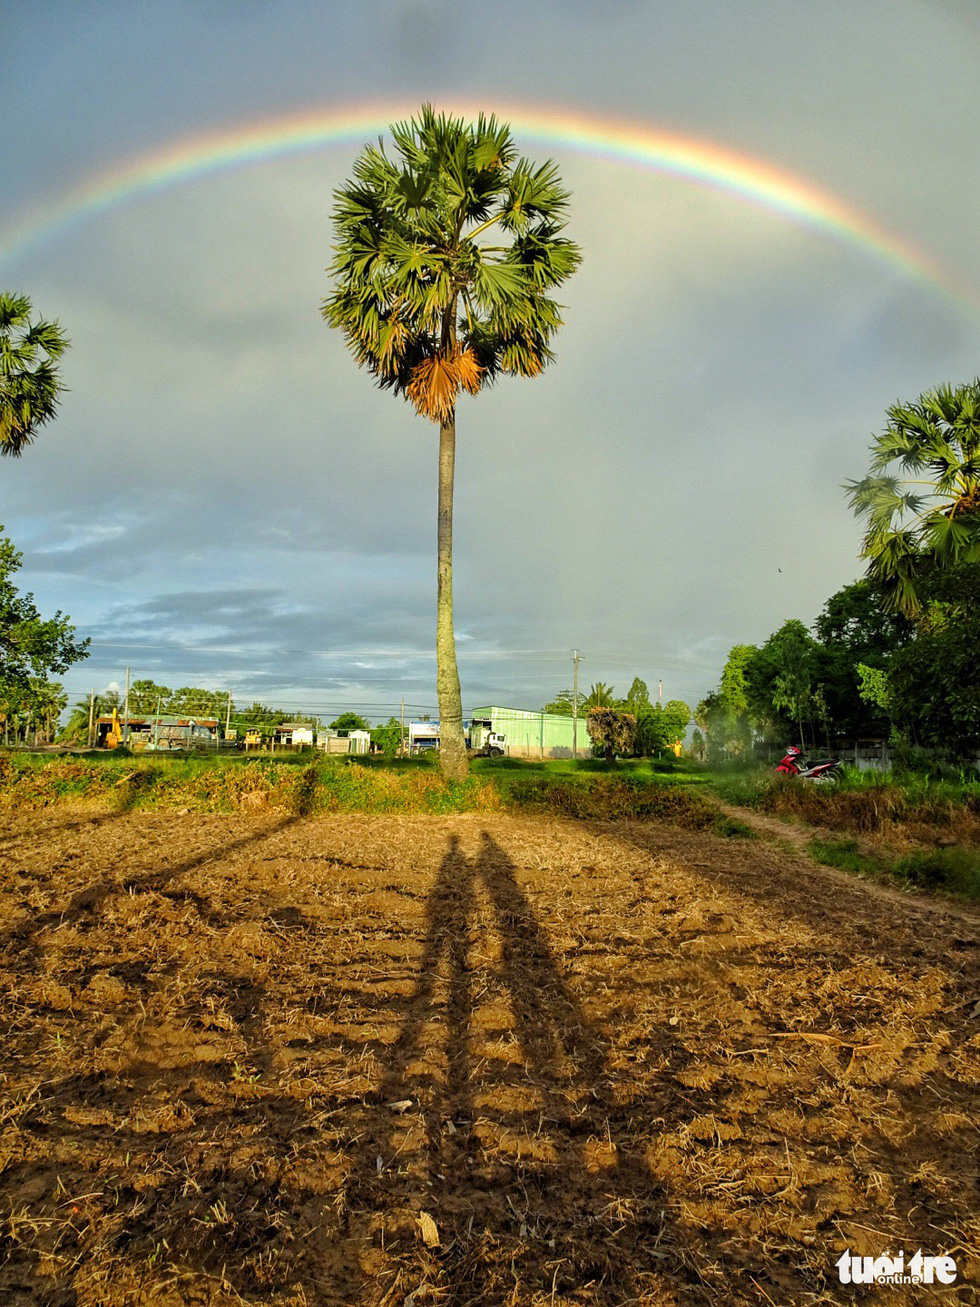 A rainbow crosses over a palm tree in a paddy field in Tri Ton District, An Giang Province, southern Vietnam. Photo: Nguyet Nhi / Tuoi Tre